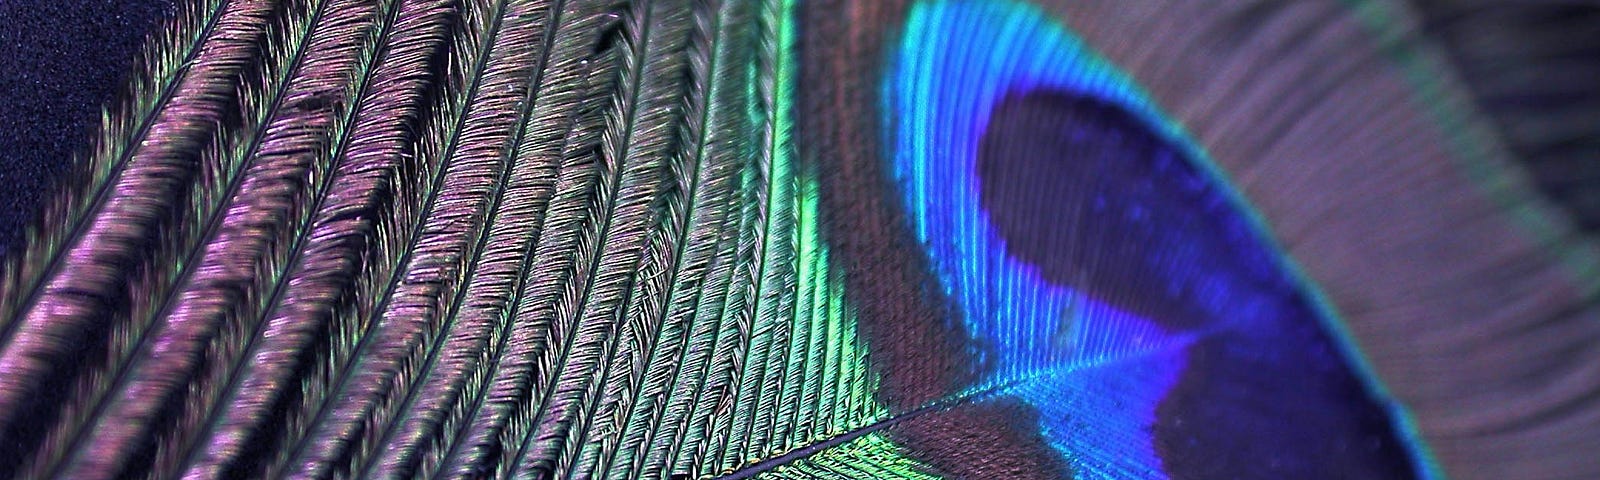 A peacock feather under magnification.